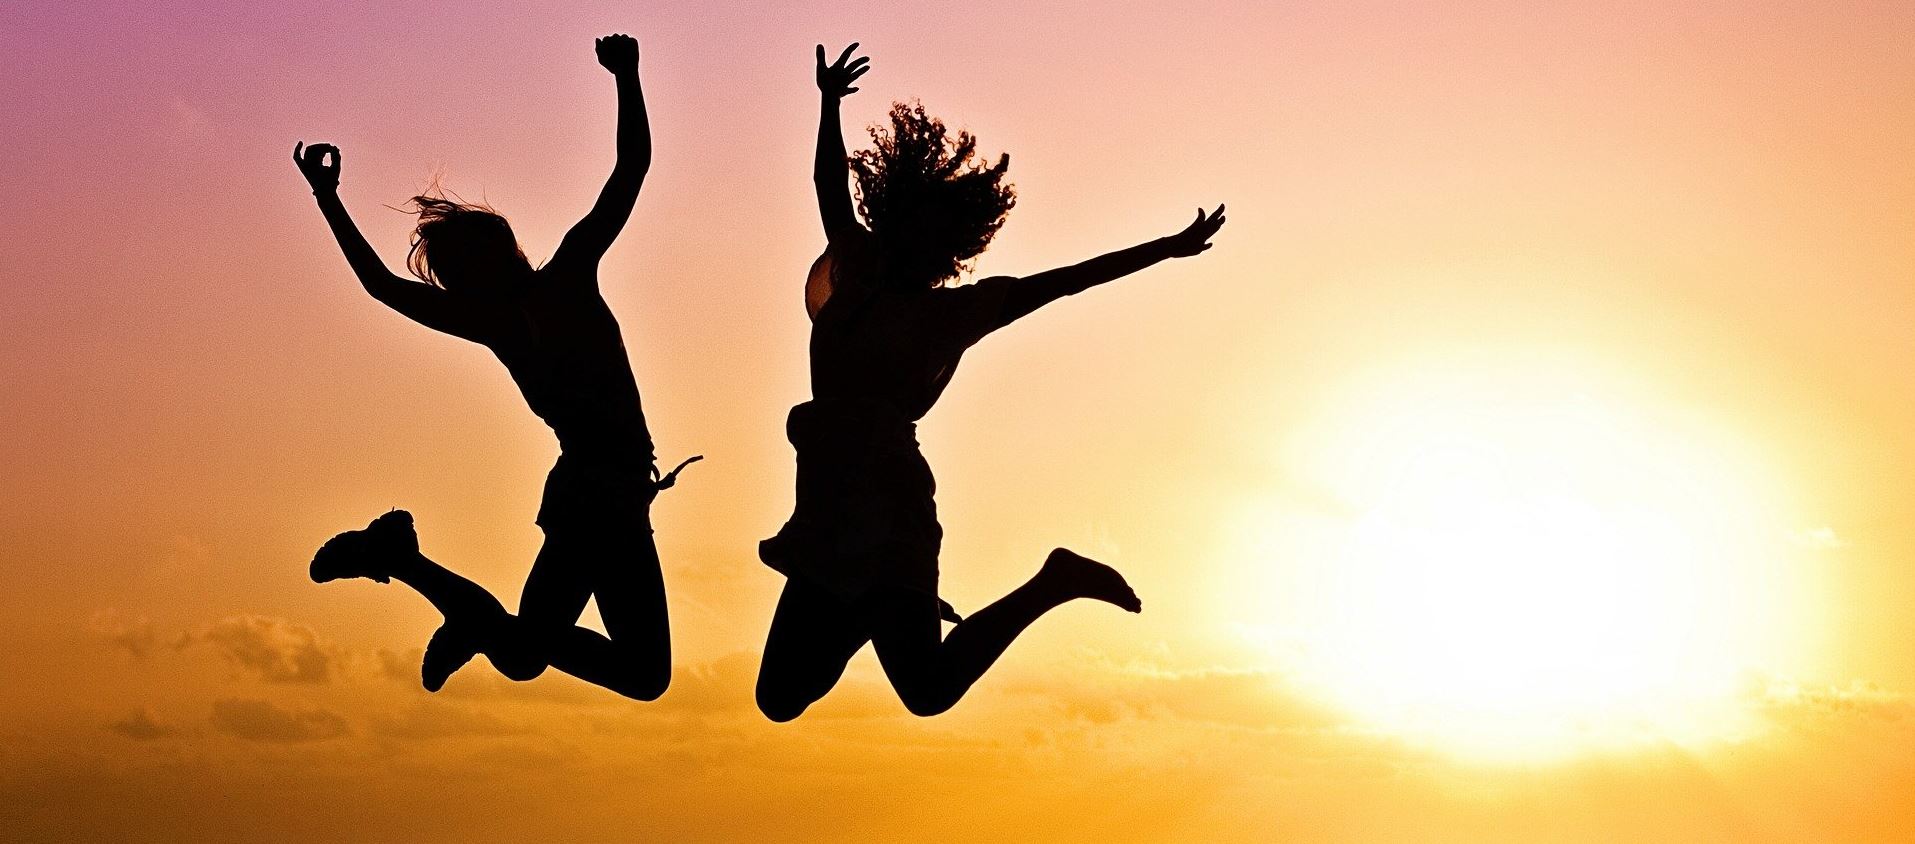 Two people jumping for joy against a sunrise